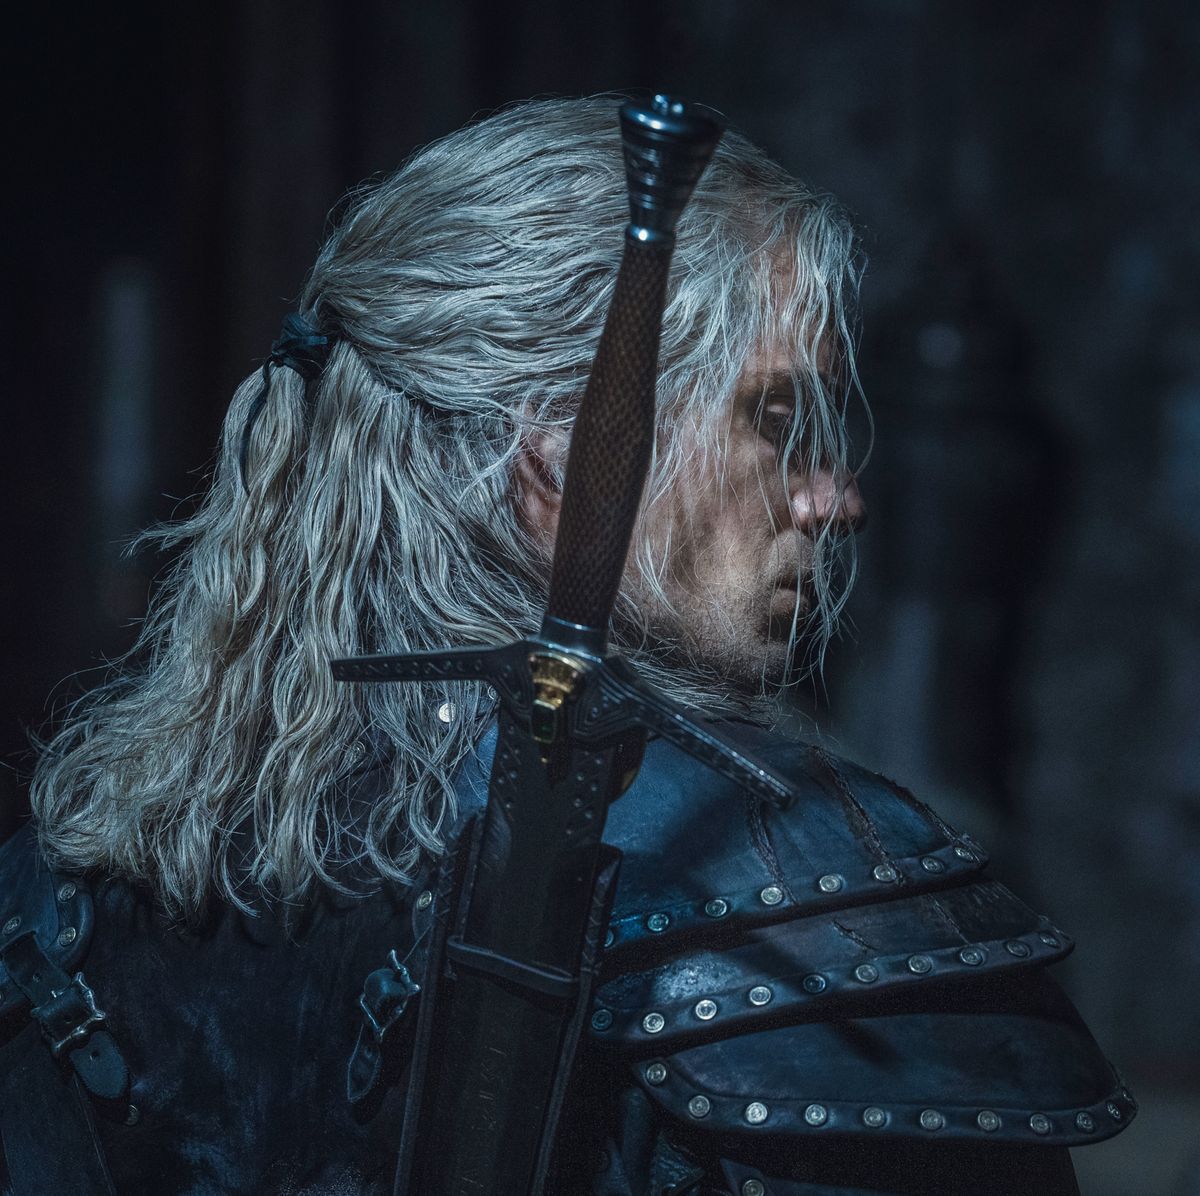 The Witcher Season 3 Finale Leaves Henry Cavill Fans Hanging - IGN